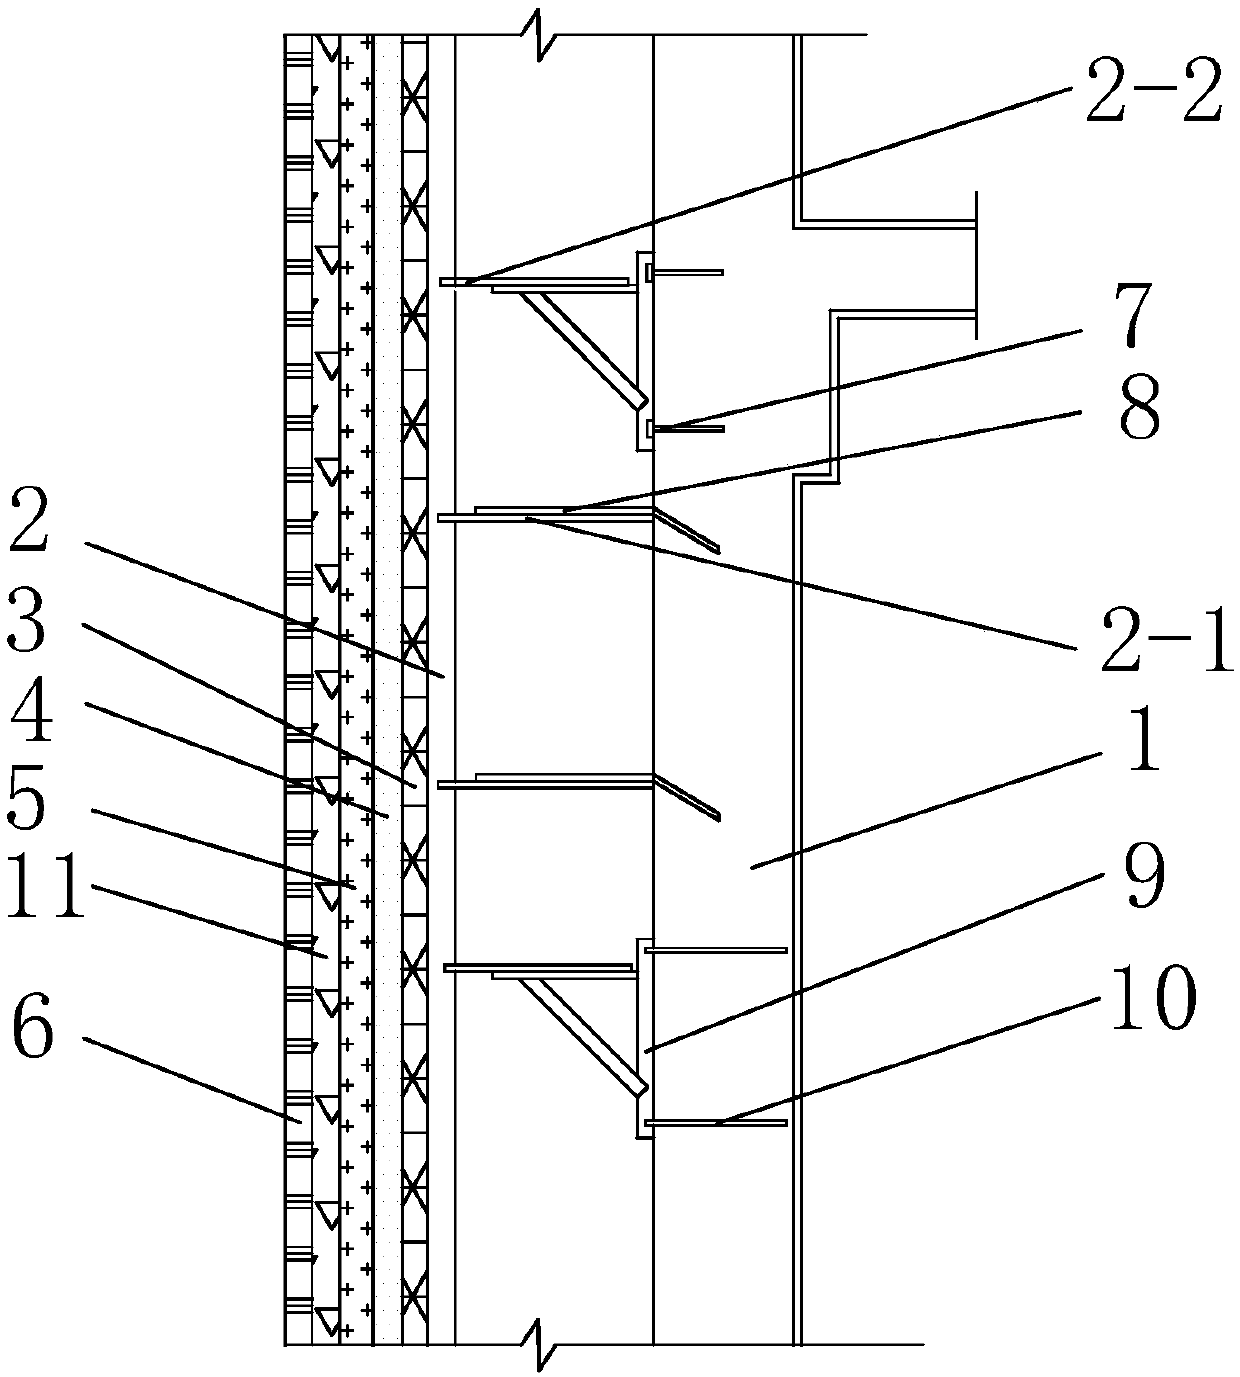 Construction method of pasting facing bricks based on large-scale GRC components on building facades